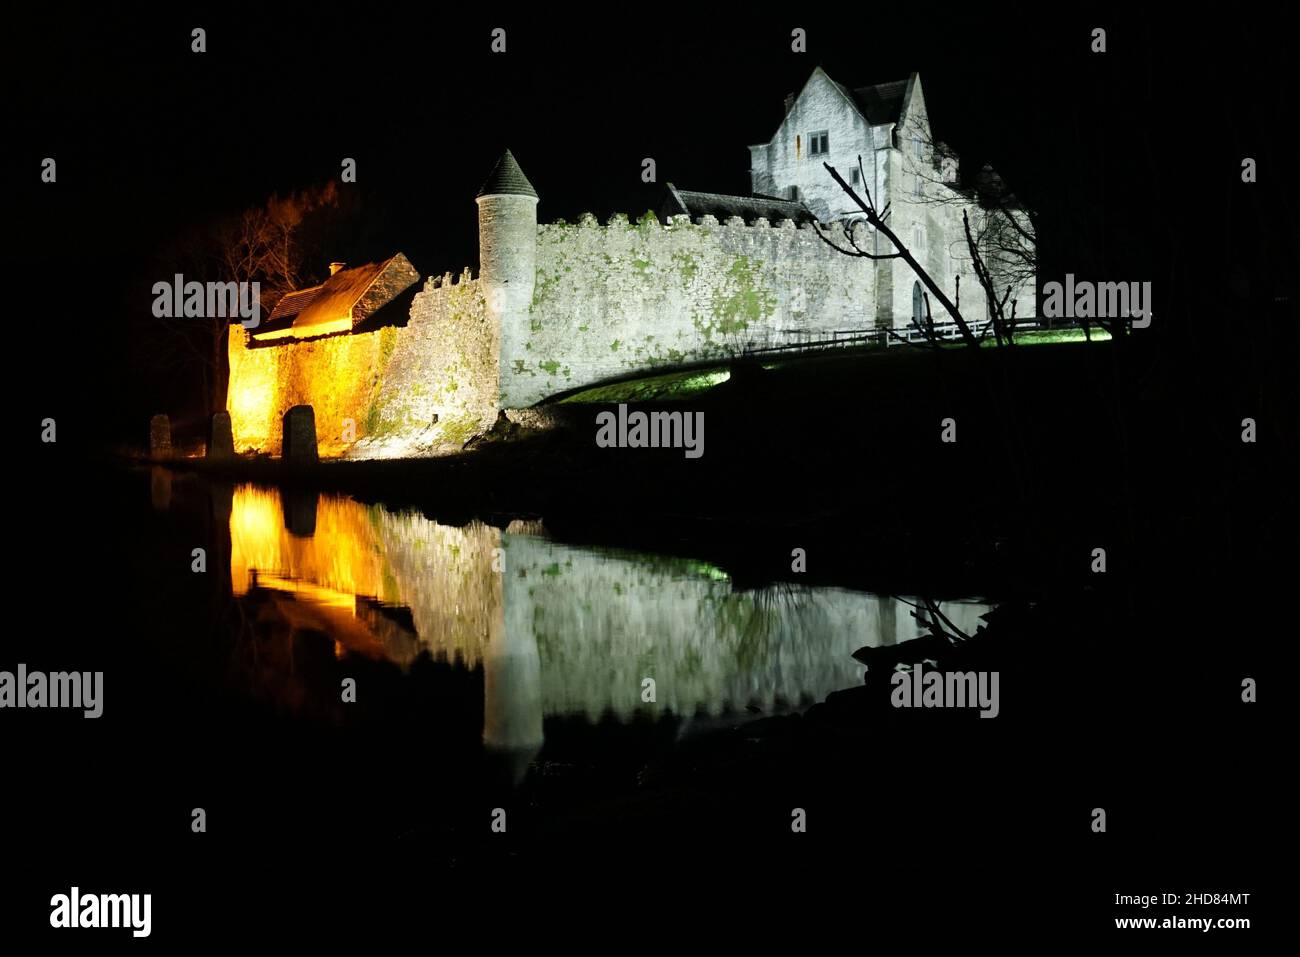 Parke's Castle, County Leitrim, Ireland at night time reflected on waters of Lough Gill Stock Photo